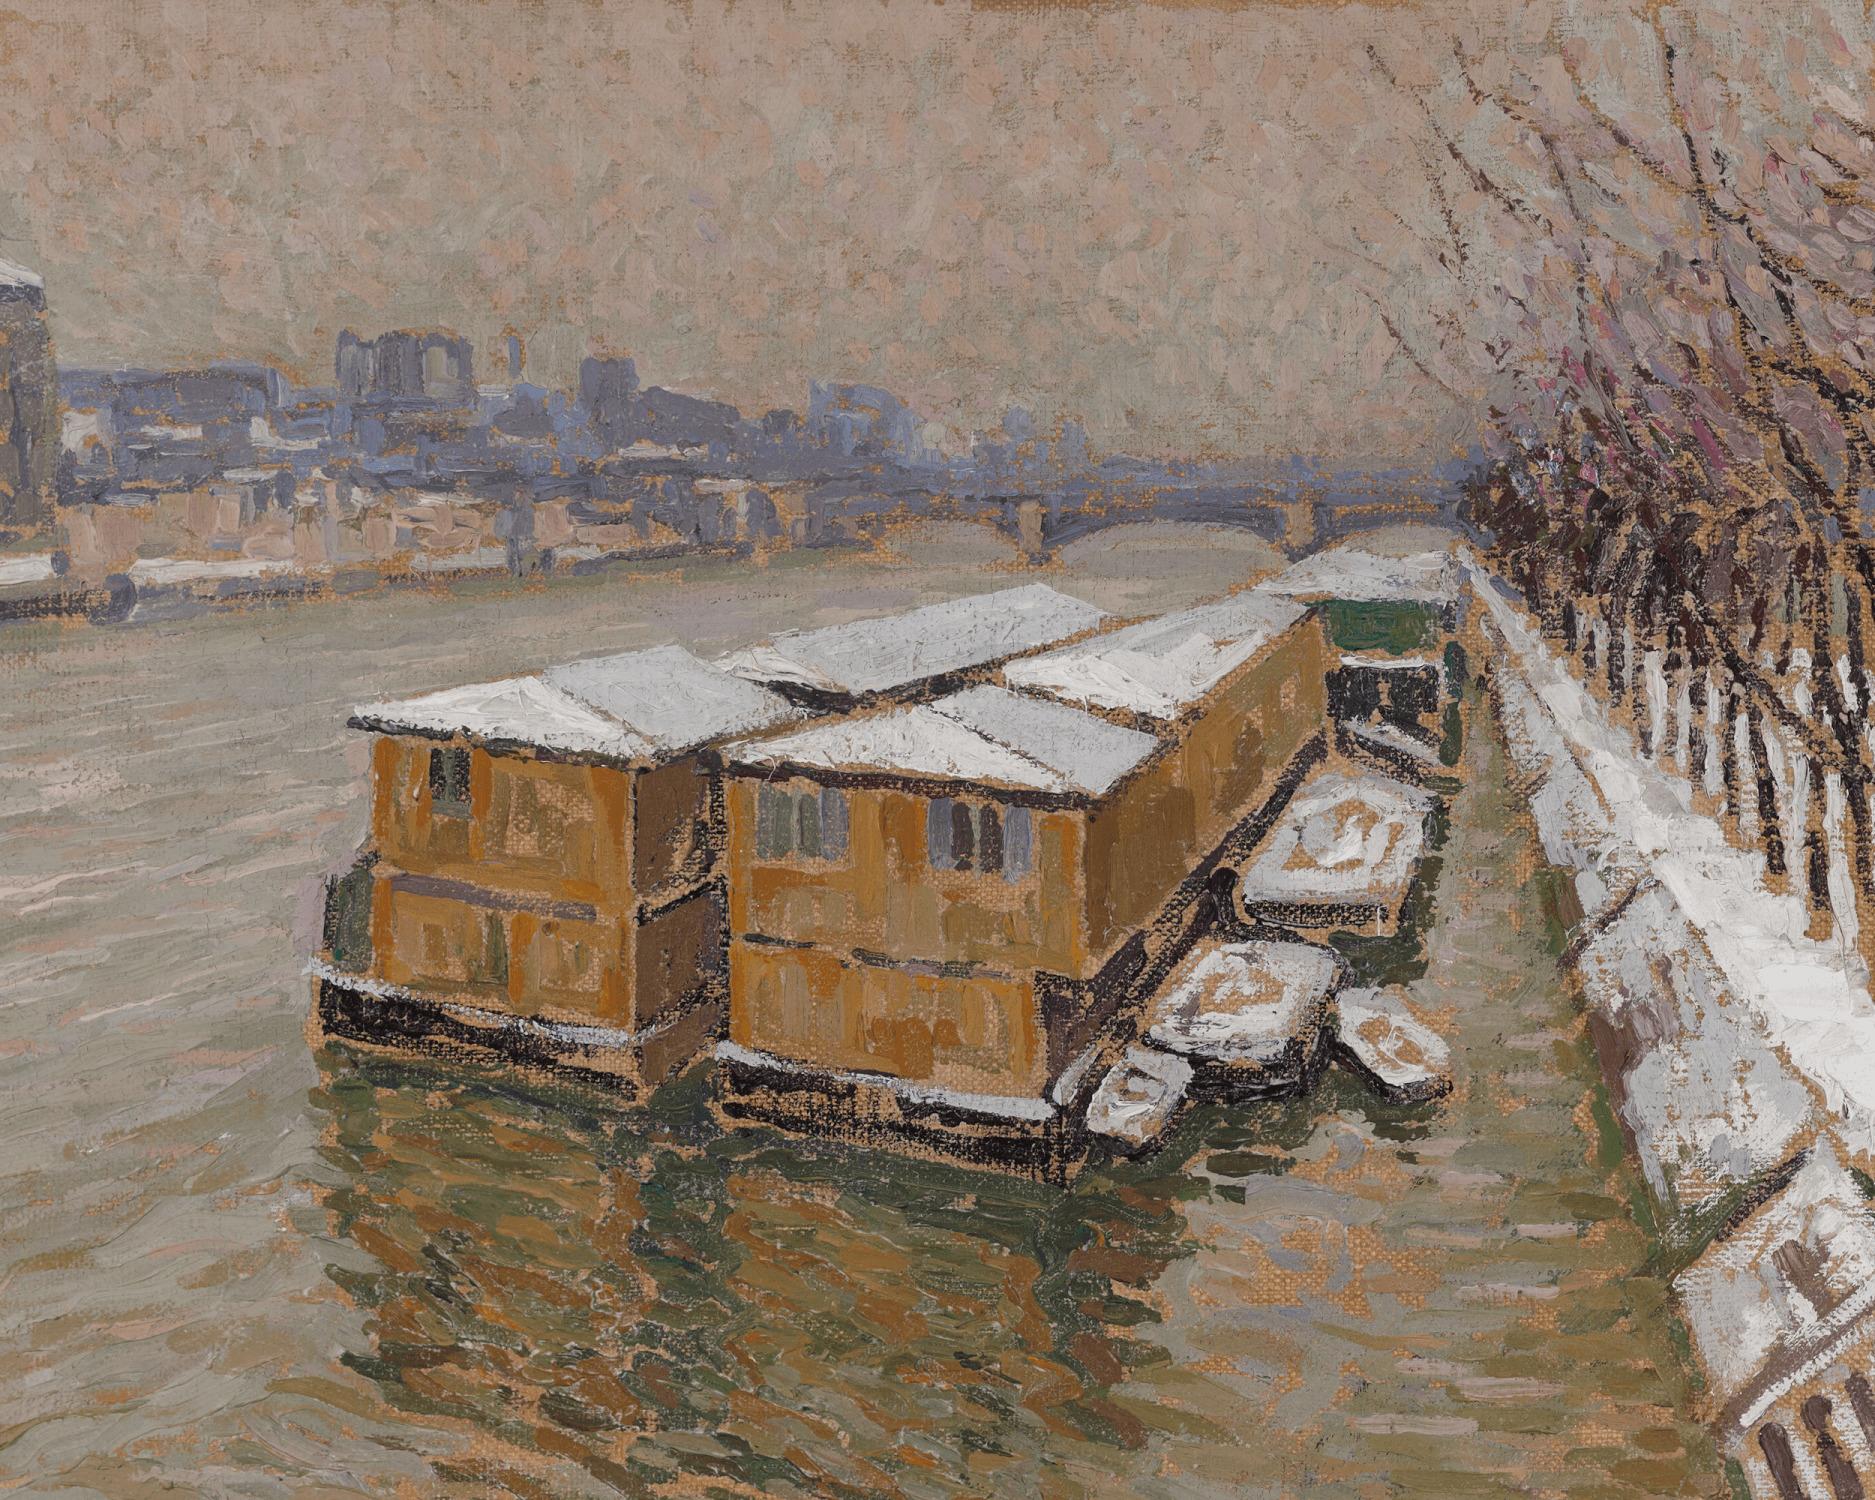 Piscine Deligny on the River Seine - Post-Impressionist Painting by Jacques Martin-Ferrières